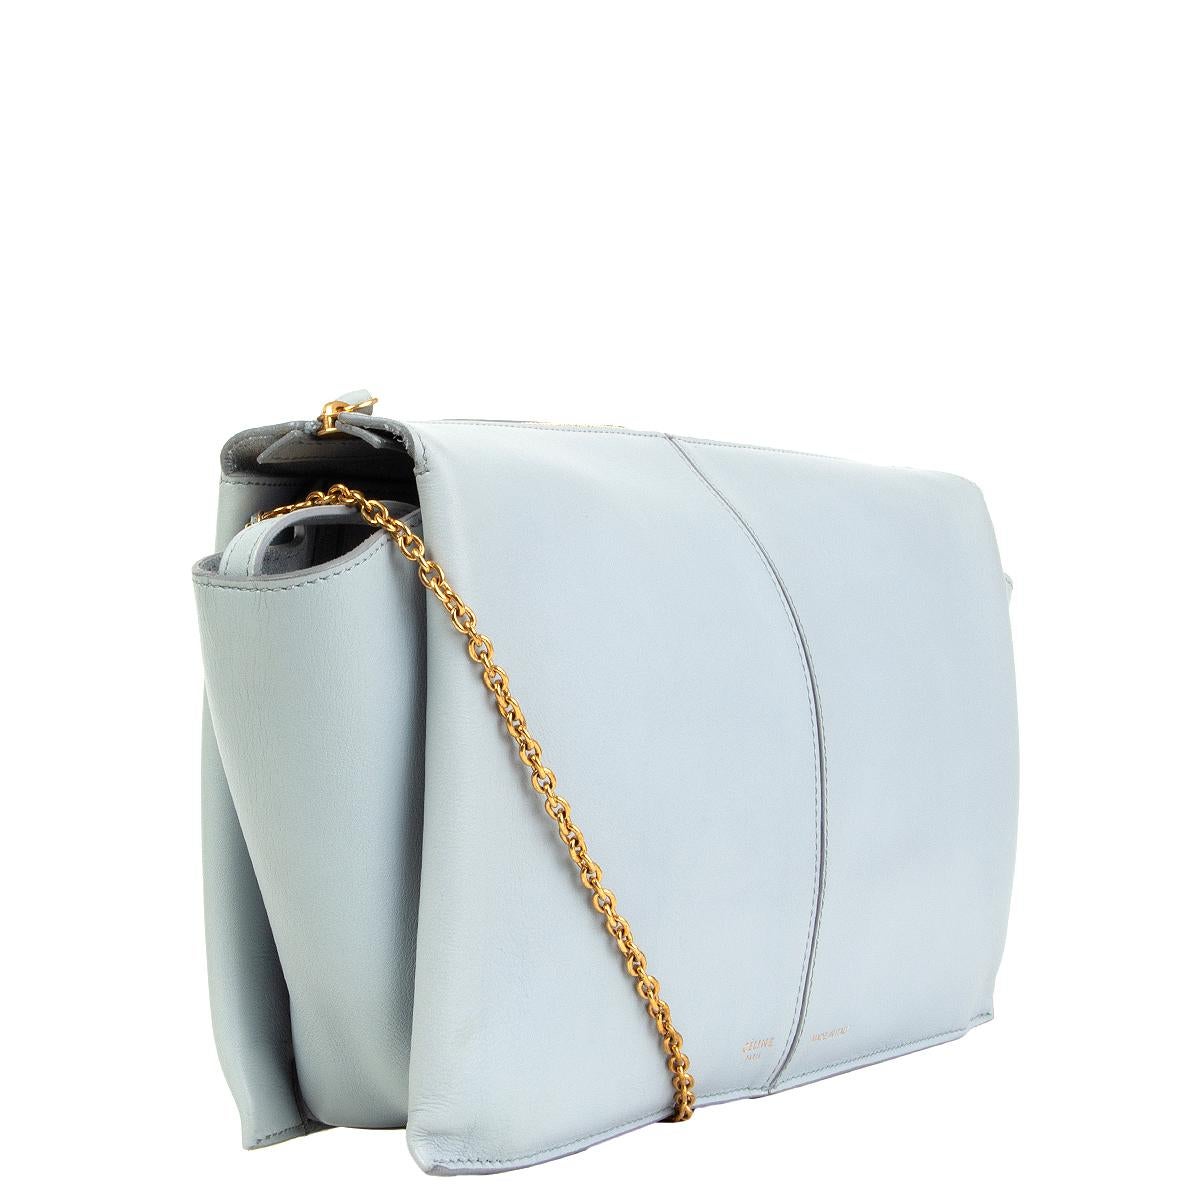 Celine 'Tri-Fold Clutch on Chain in Cloud (dusty light blue) Supple Nautral Calfskin leather. Closes with a zipper on top. Inside is divided into three compartement  . Unlined with a zipper pocket in the middle pocket. Has been carried and is in